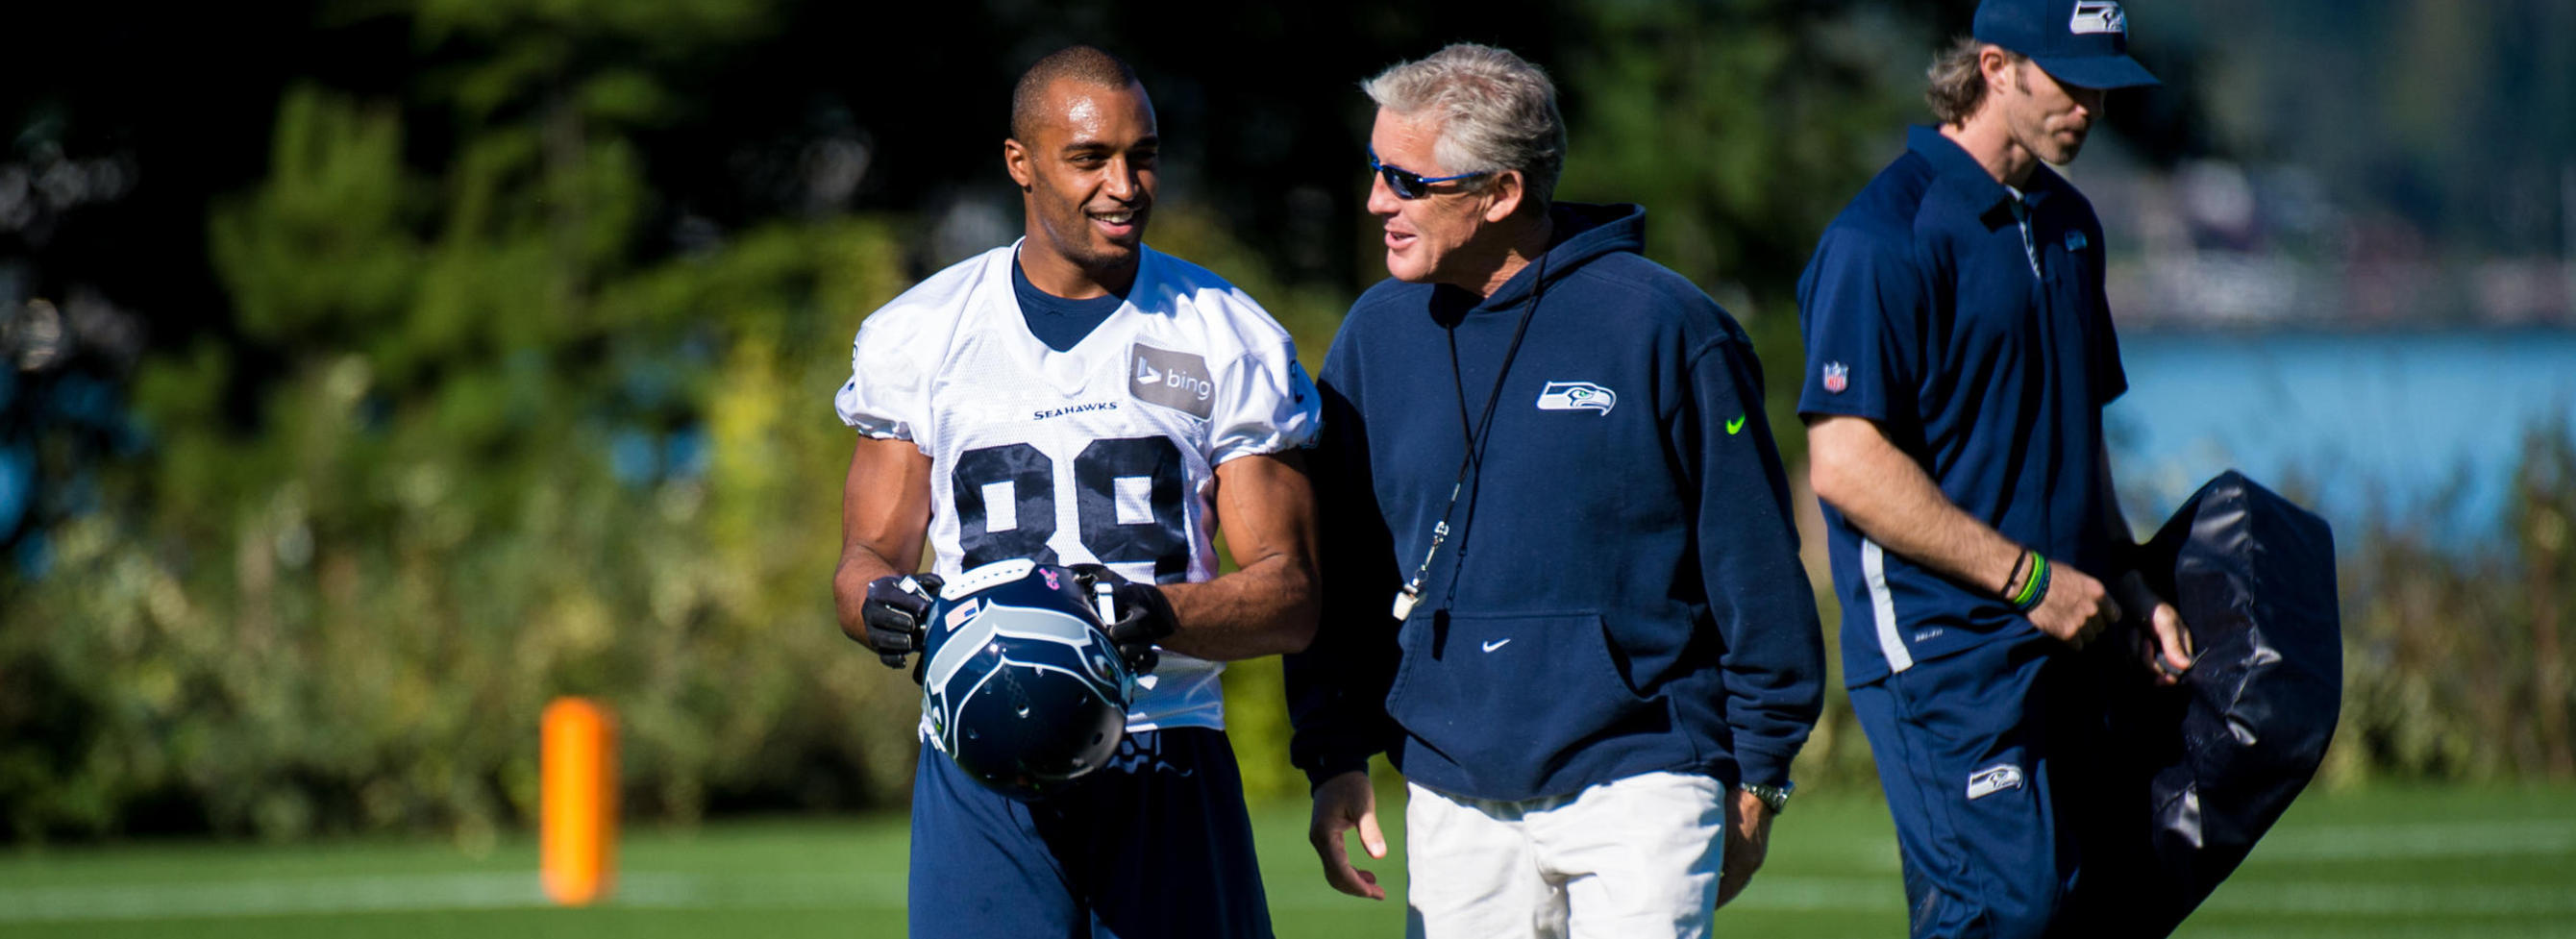 Seahawks coach Pete Carroll talk to a player on the field during practice